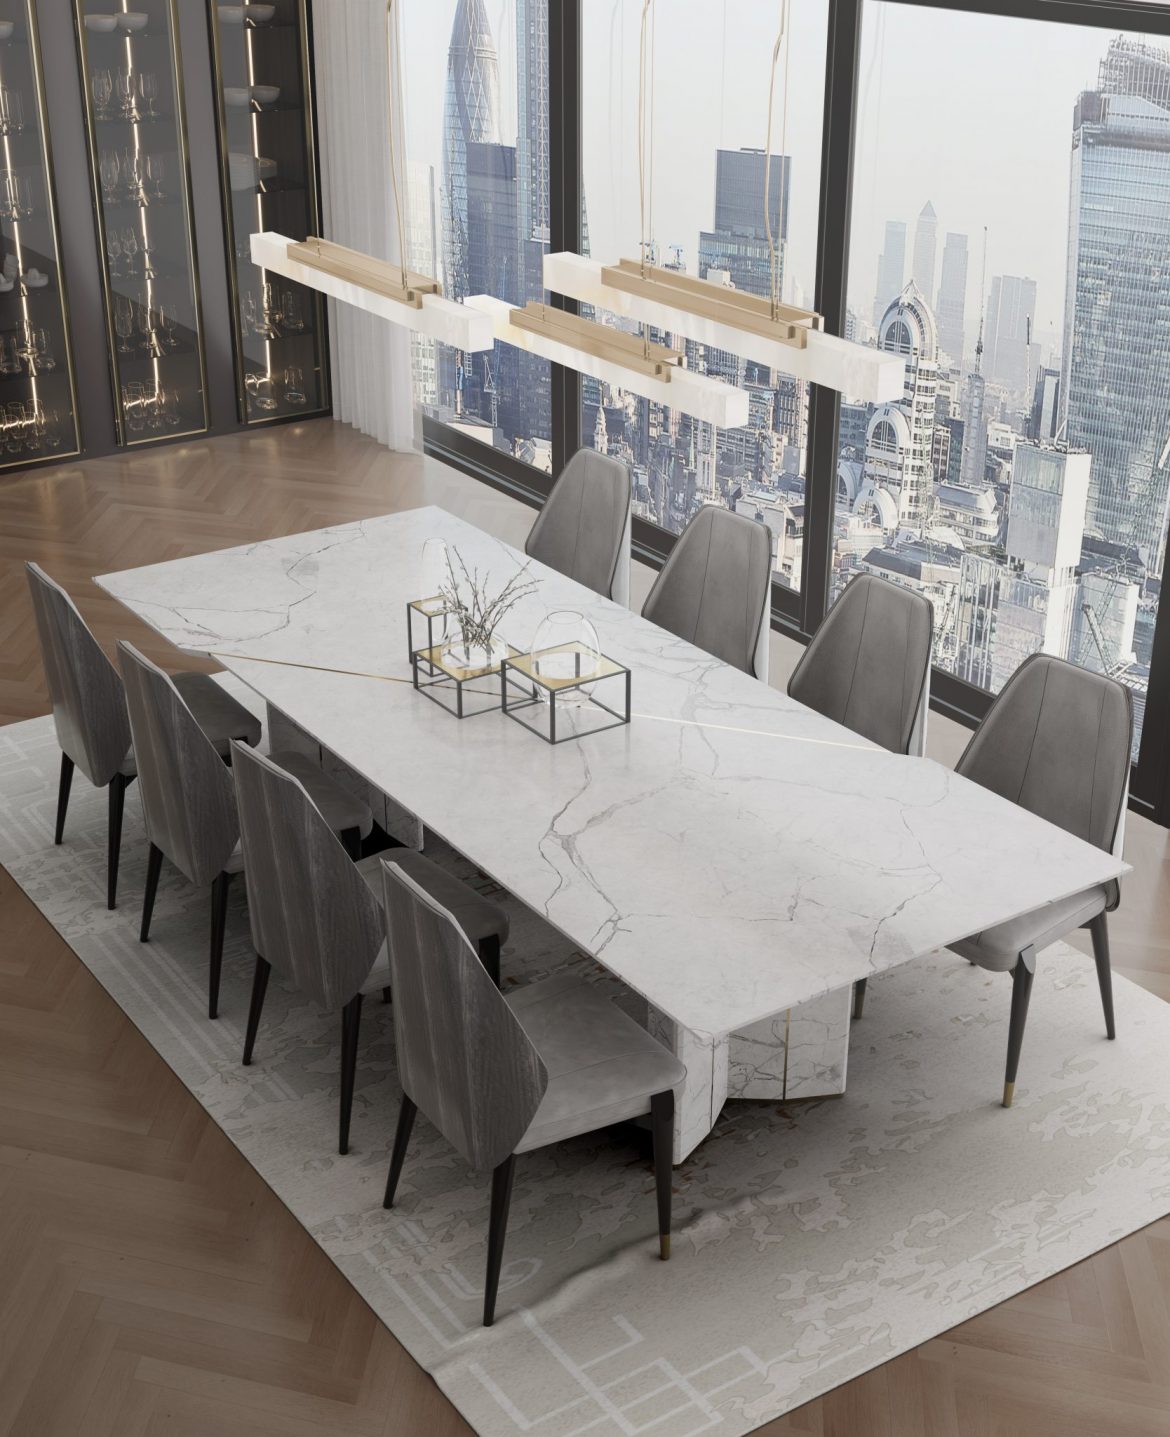 Best Selection Of Dining Tables To Adorn Your Dining Room!